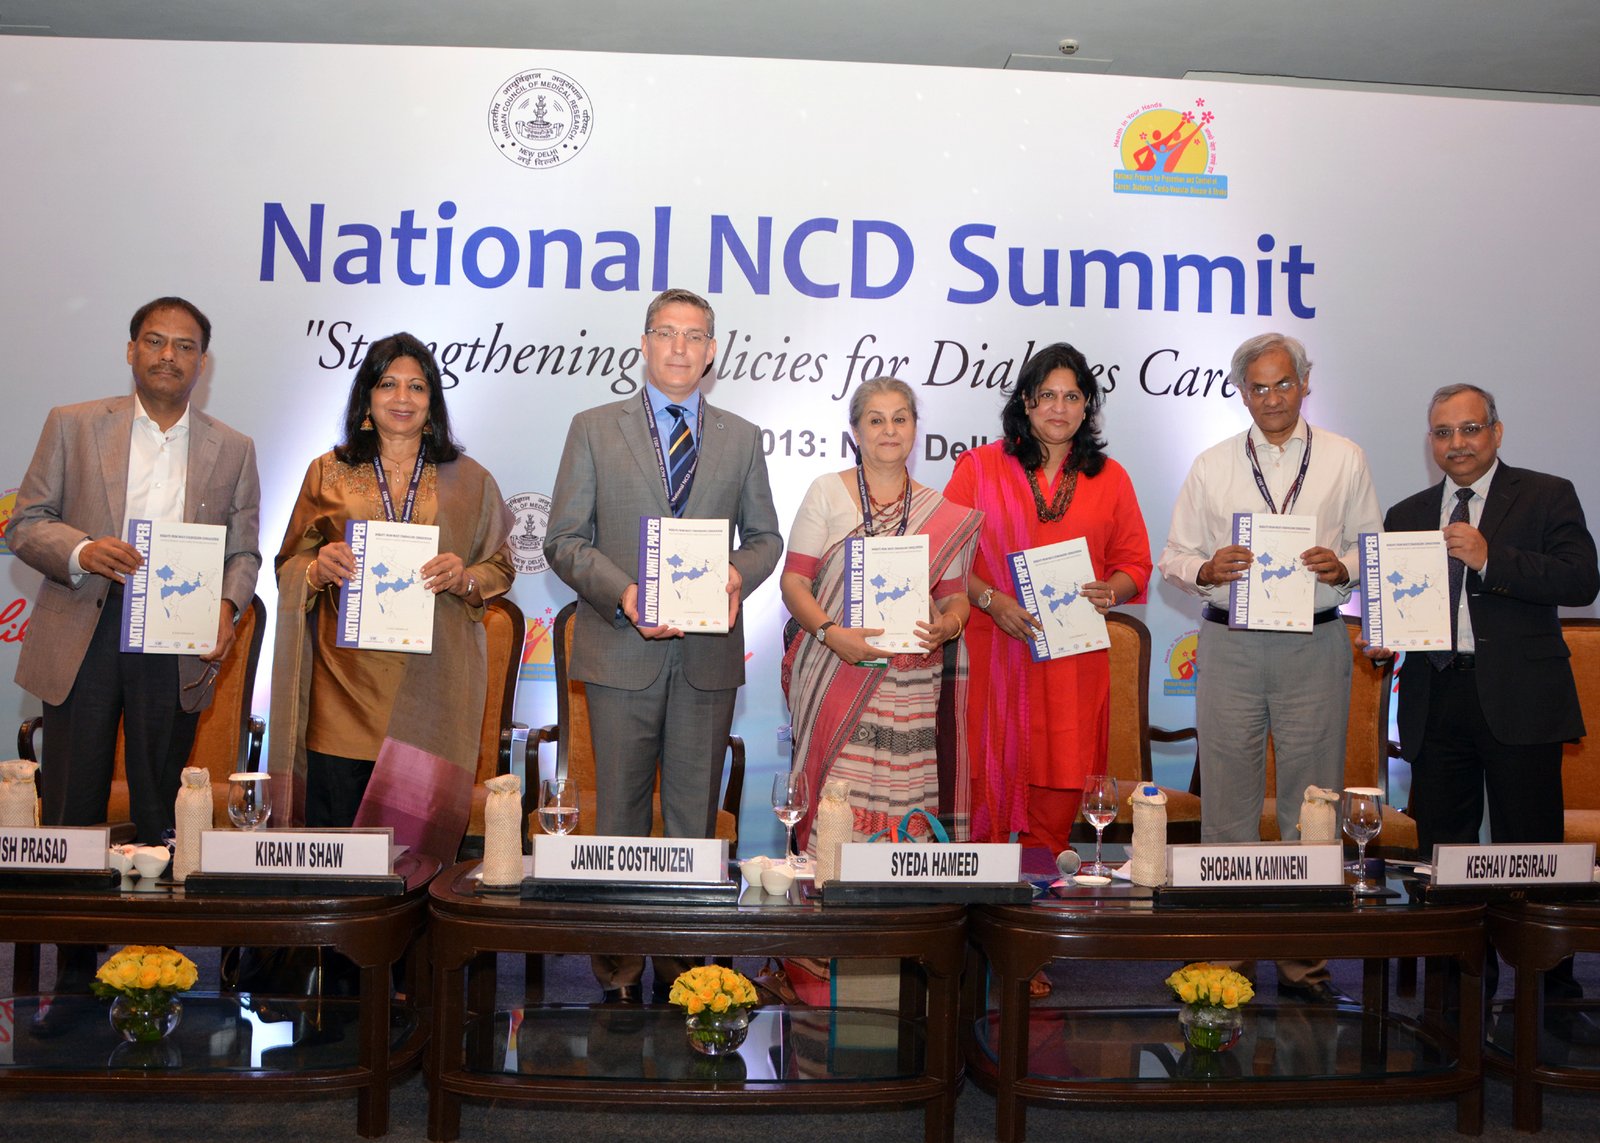 Dr Syeda Hameed, member, Planning Commission, releasing the CII national white paper "Insights from Multi Stakeholder Consultation - Management & Care of Diabetes in India" at the National NCD Summit, in New Delhi on June 07, 2013